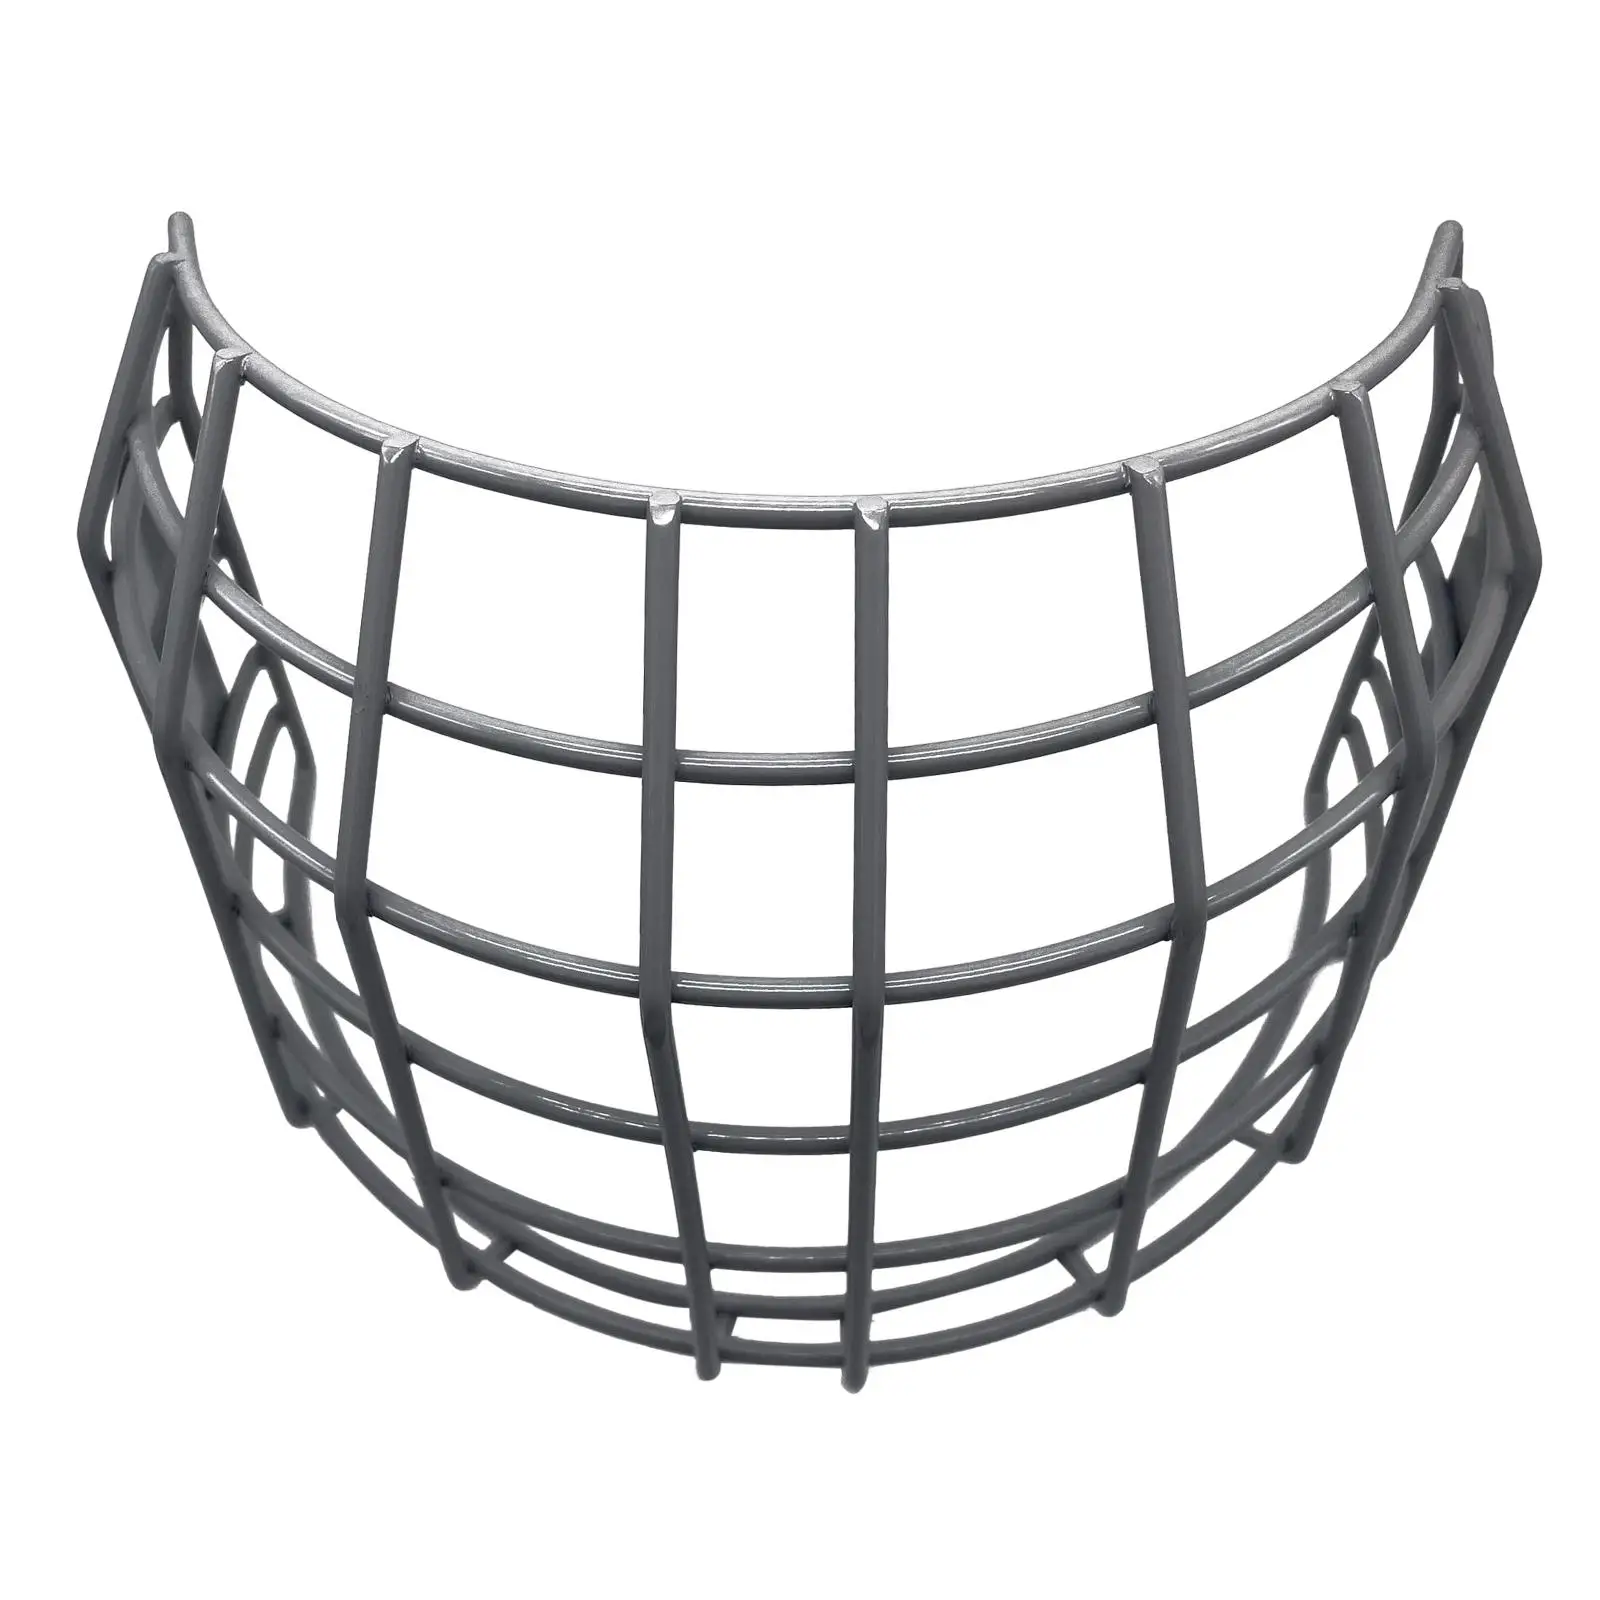 Batting Helmet Safety Mask Iron Wire Face Protective Wide Vision Baseball Face Guard for Softball Teeball Women Men